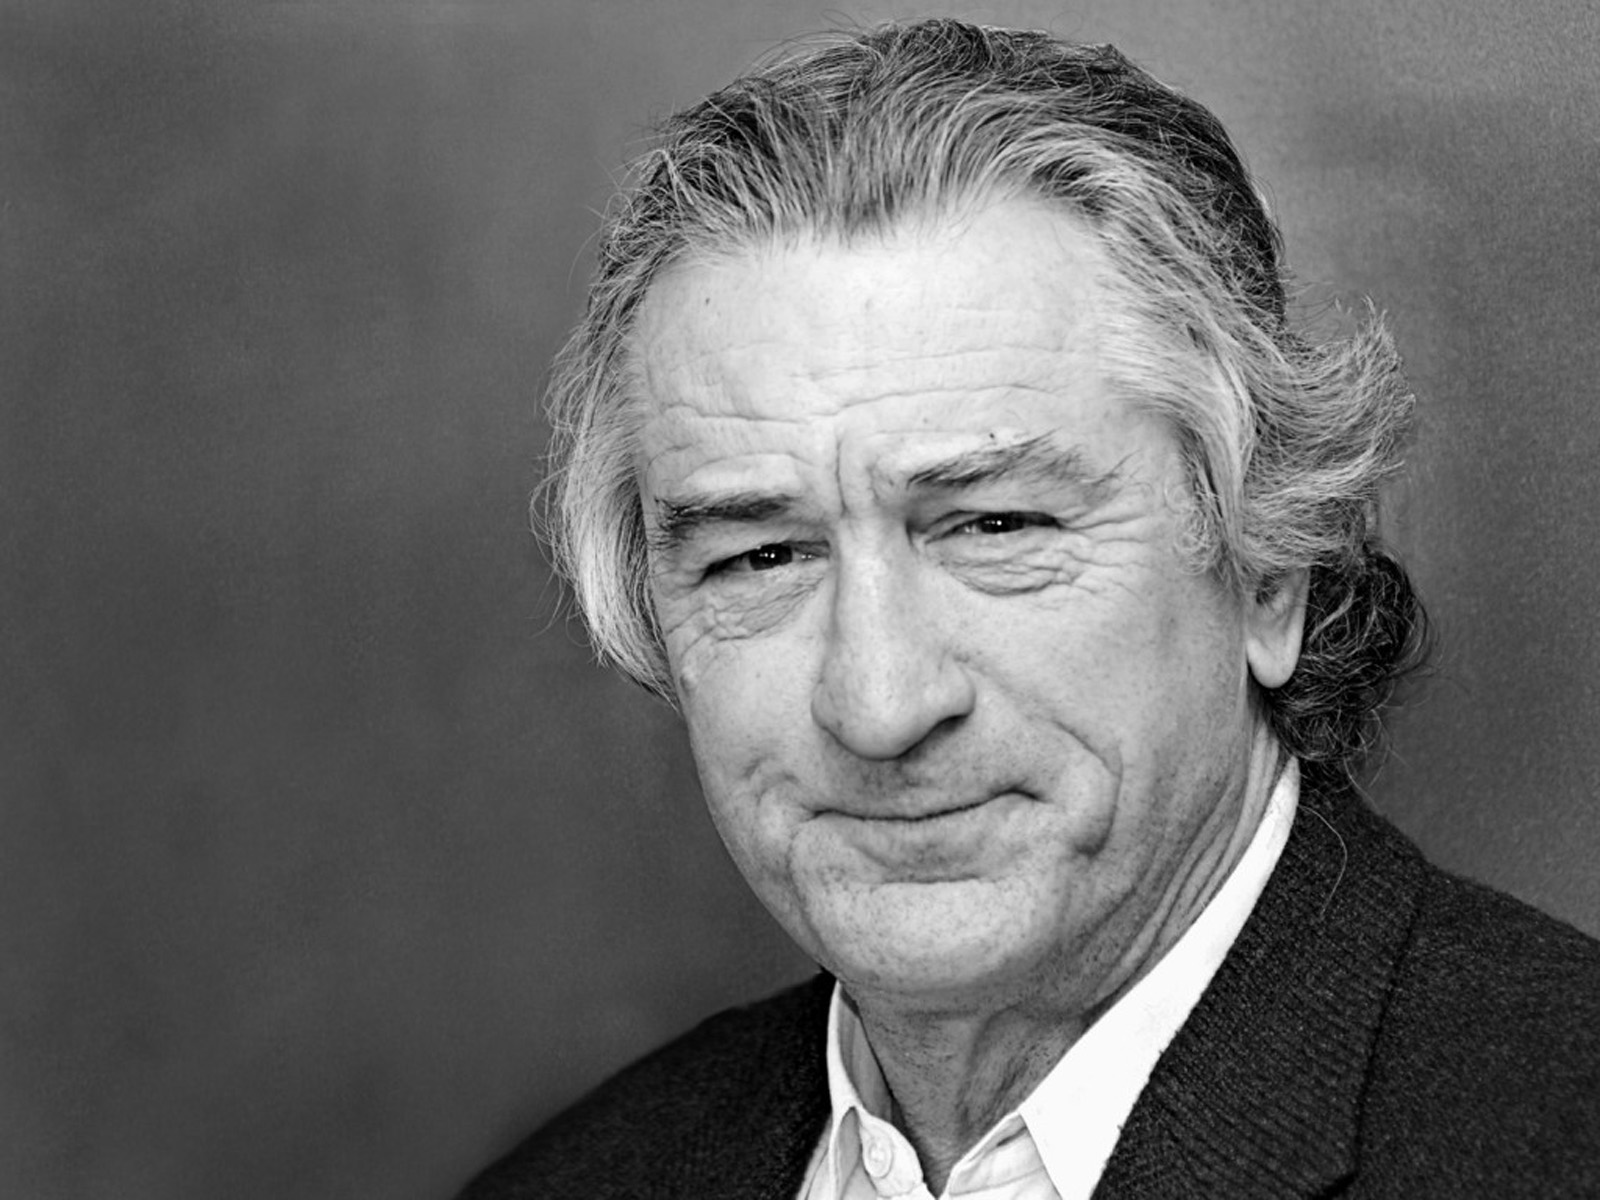 Robert De Niro Wallpapers High Resolution and Quality Download